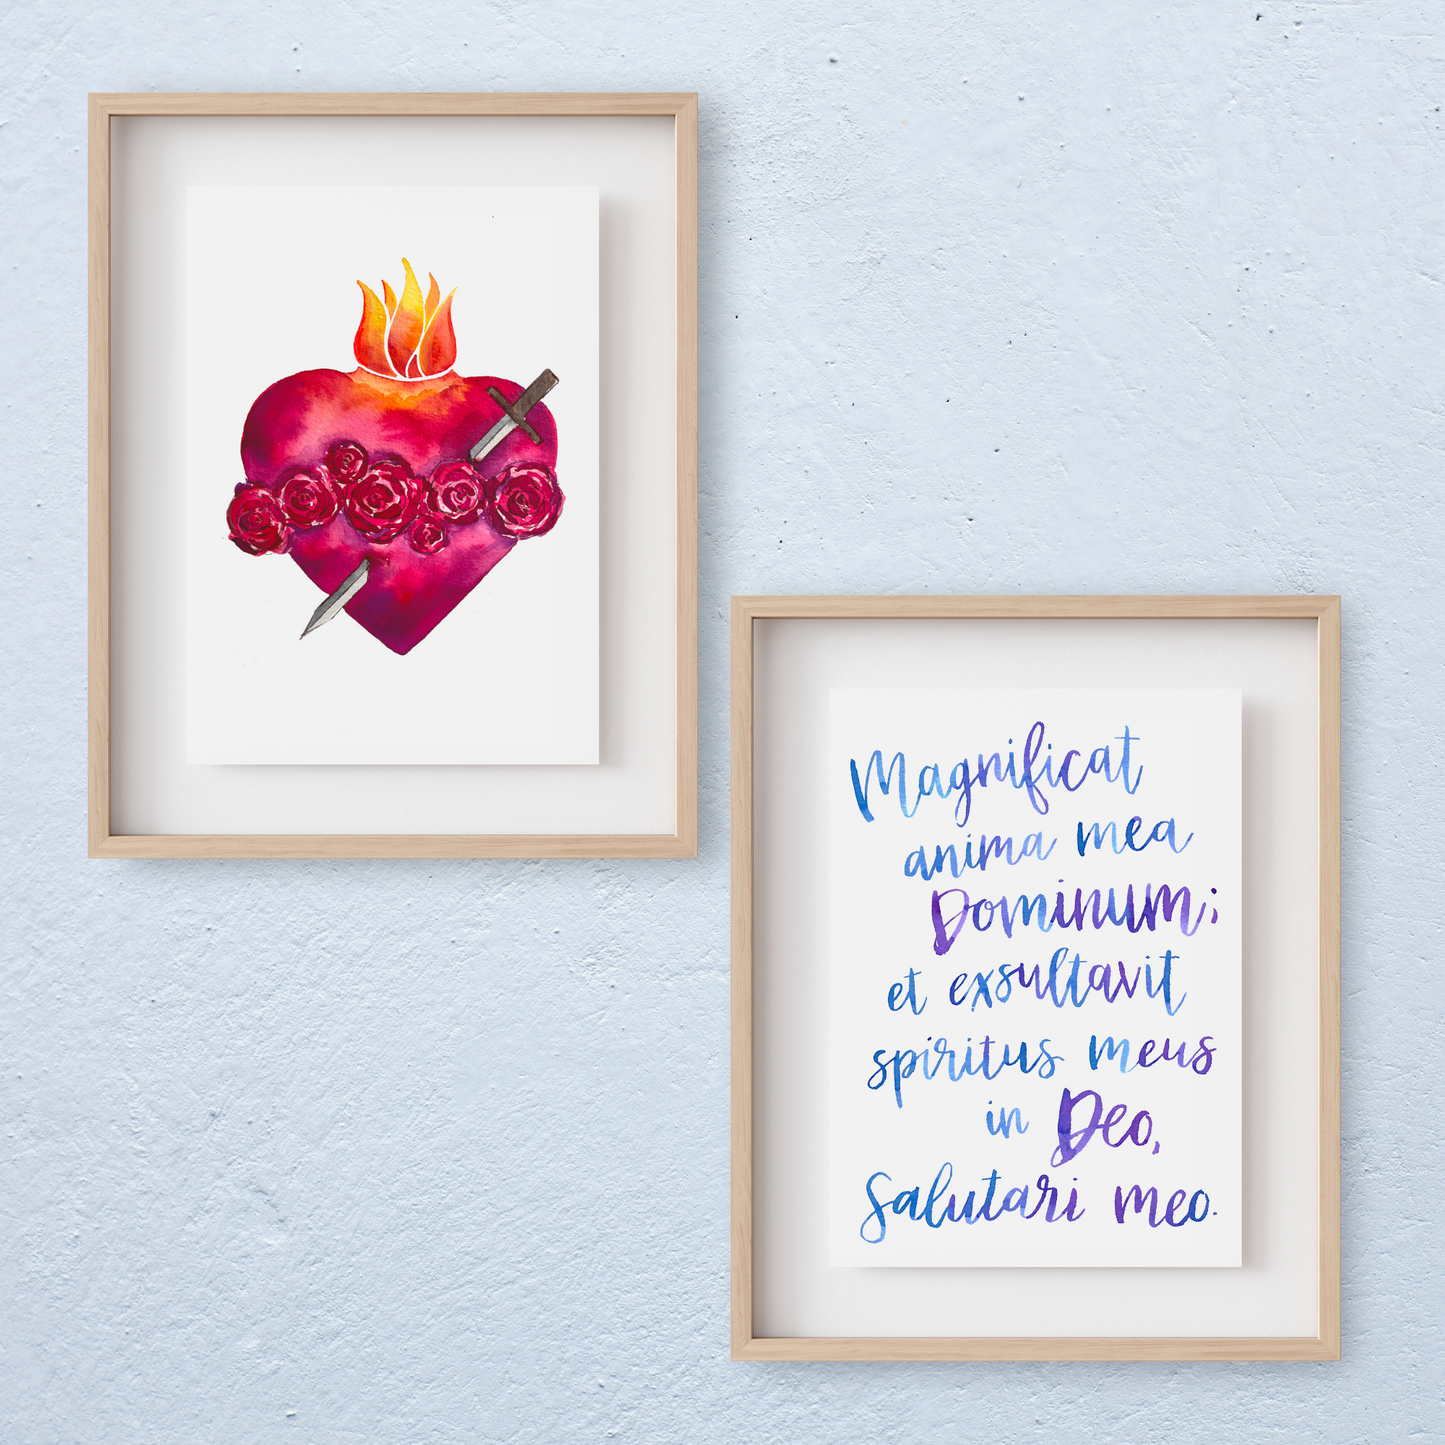 Featured Art Prints - Immaculate Heart of Mary & the Magnificat